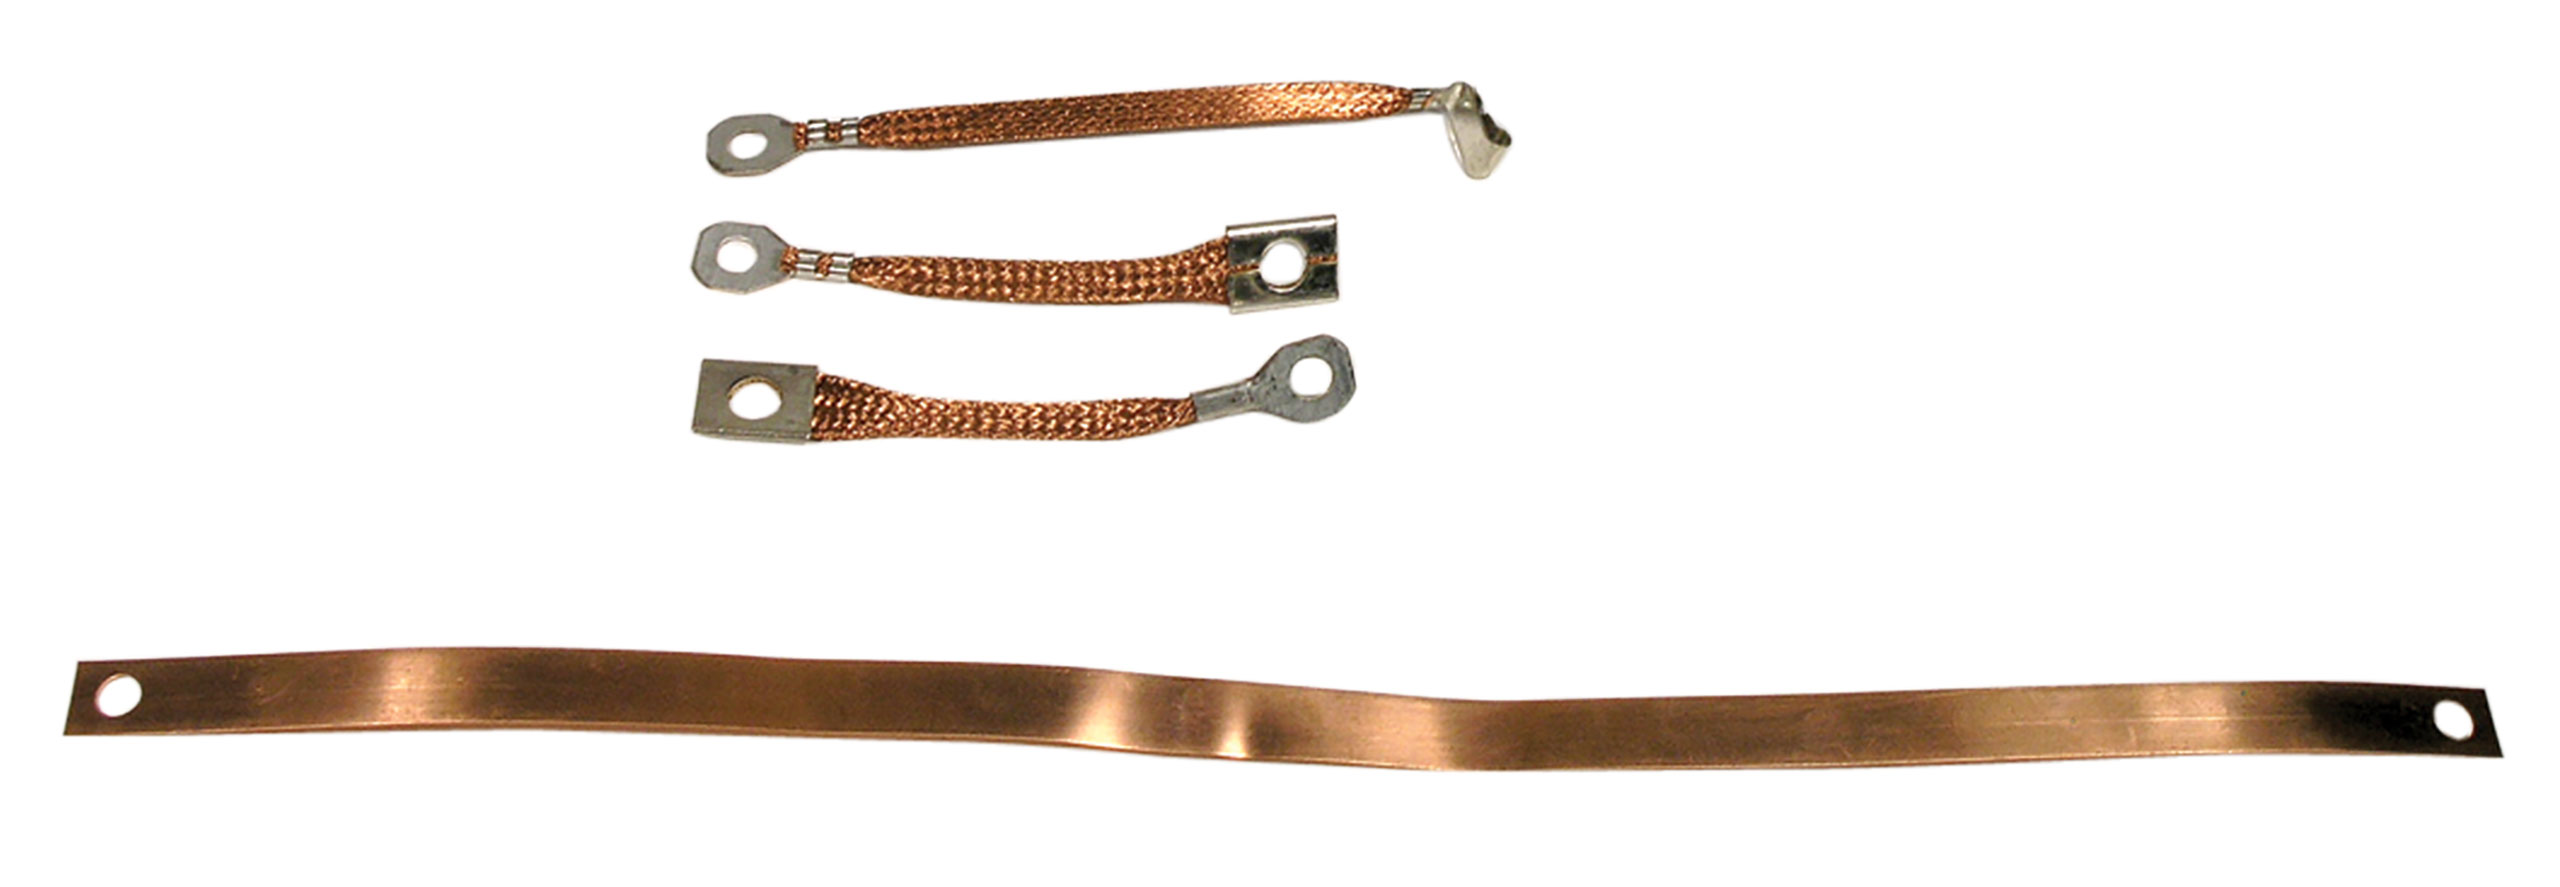 C3 1968-1970 Chevrolet Corvette Ground Strap Kit. Standard Exhaust - Lectric Limited, Inc.